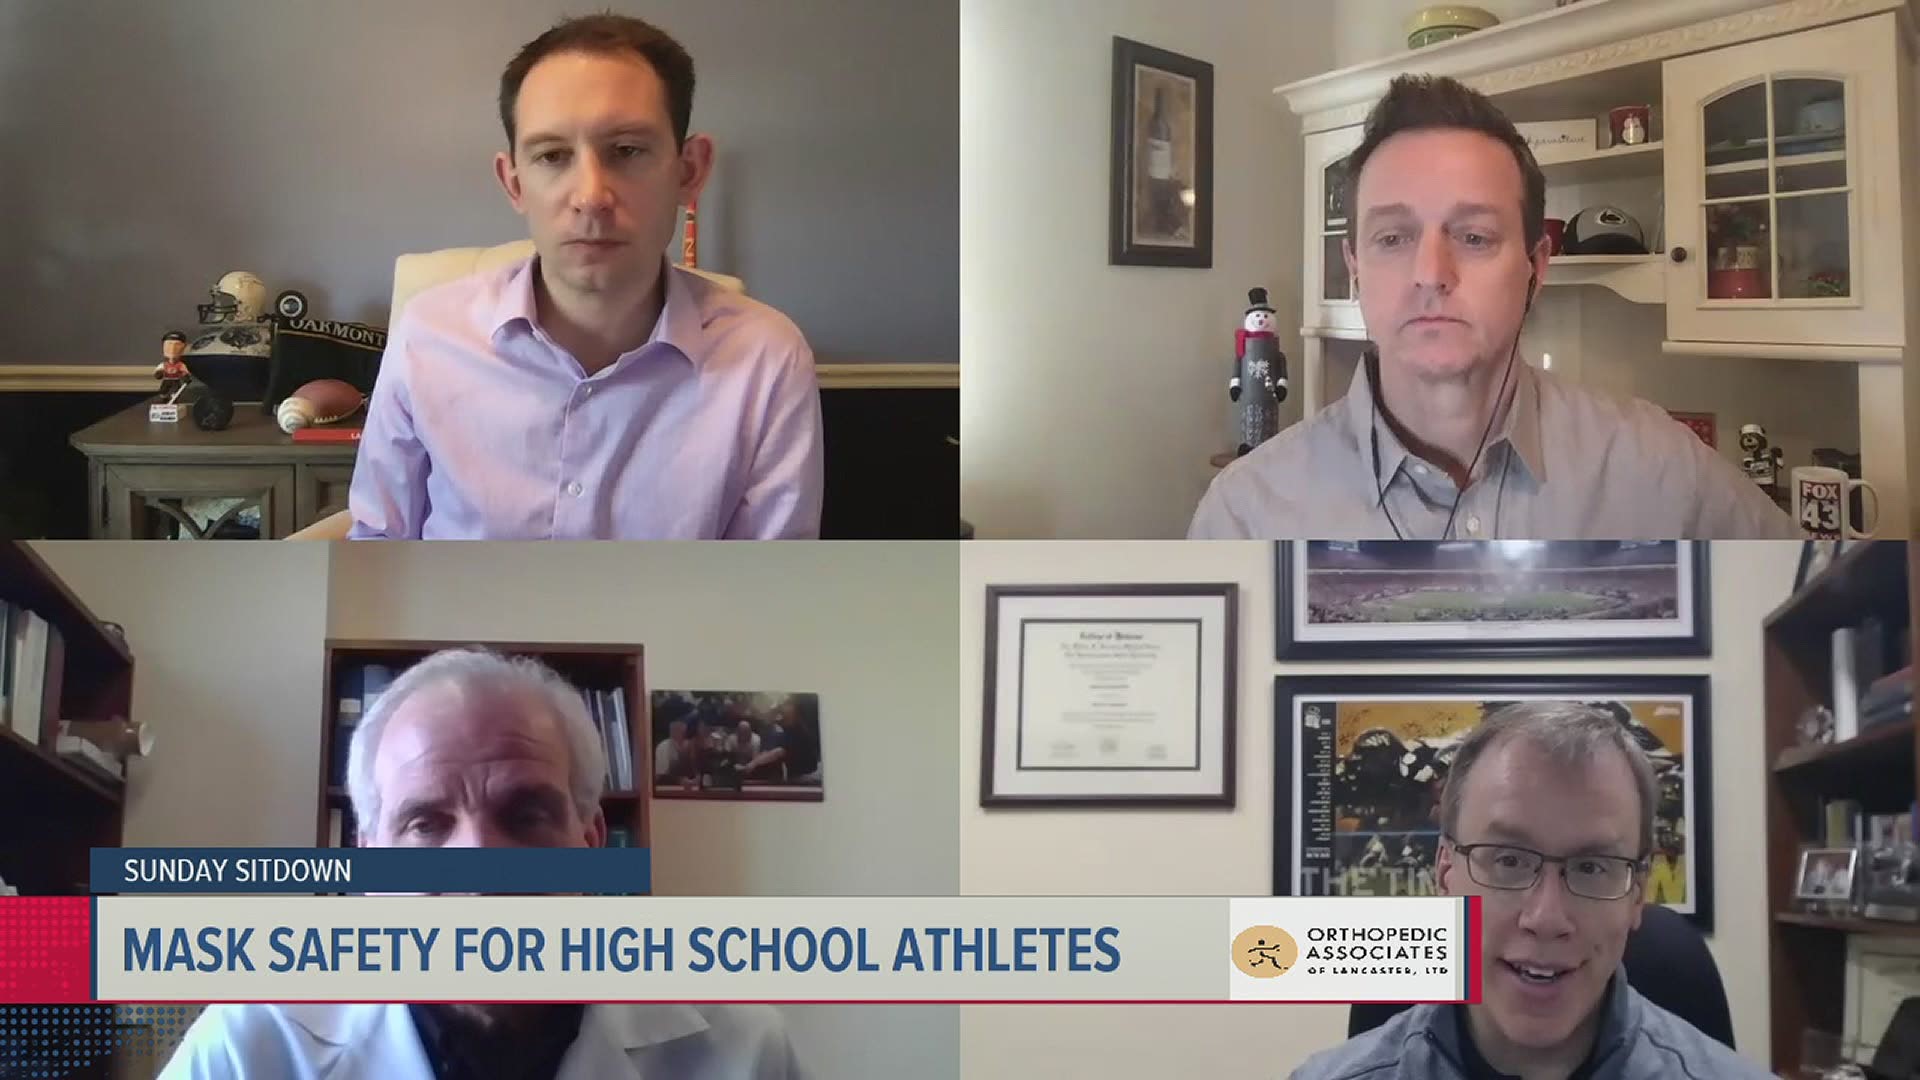 Mask safety continues to be one of the top topics of discussion around Pennsylvania high school sports.